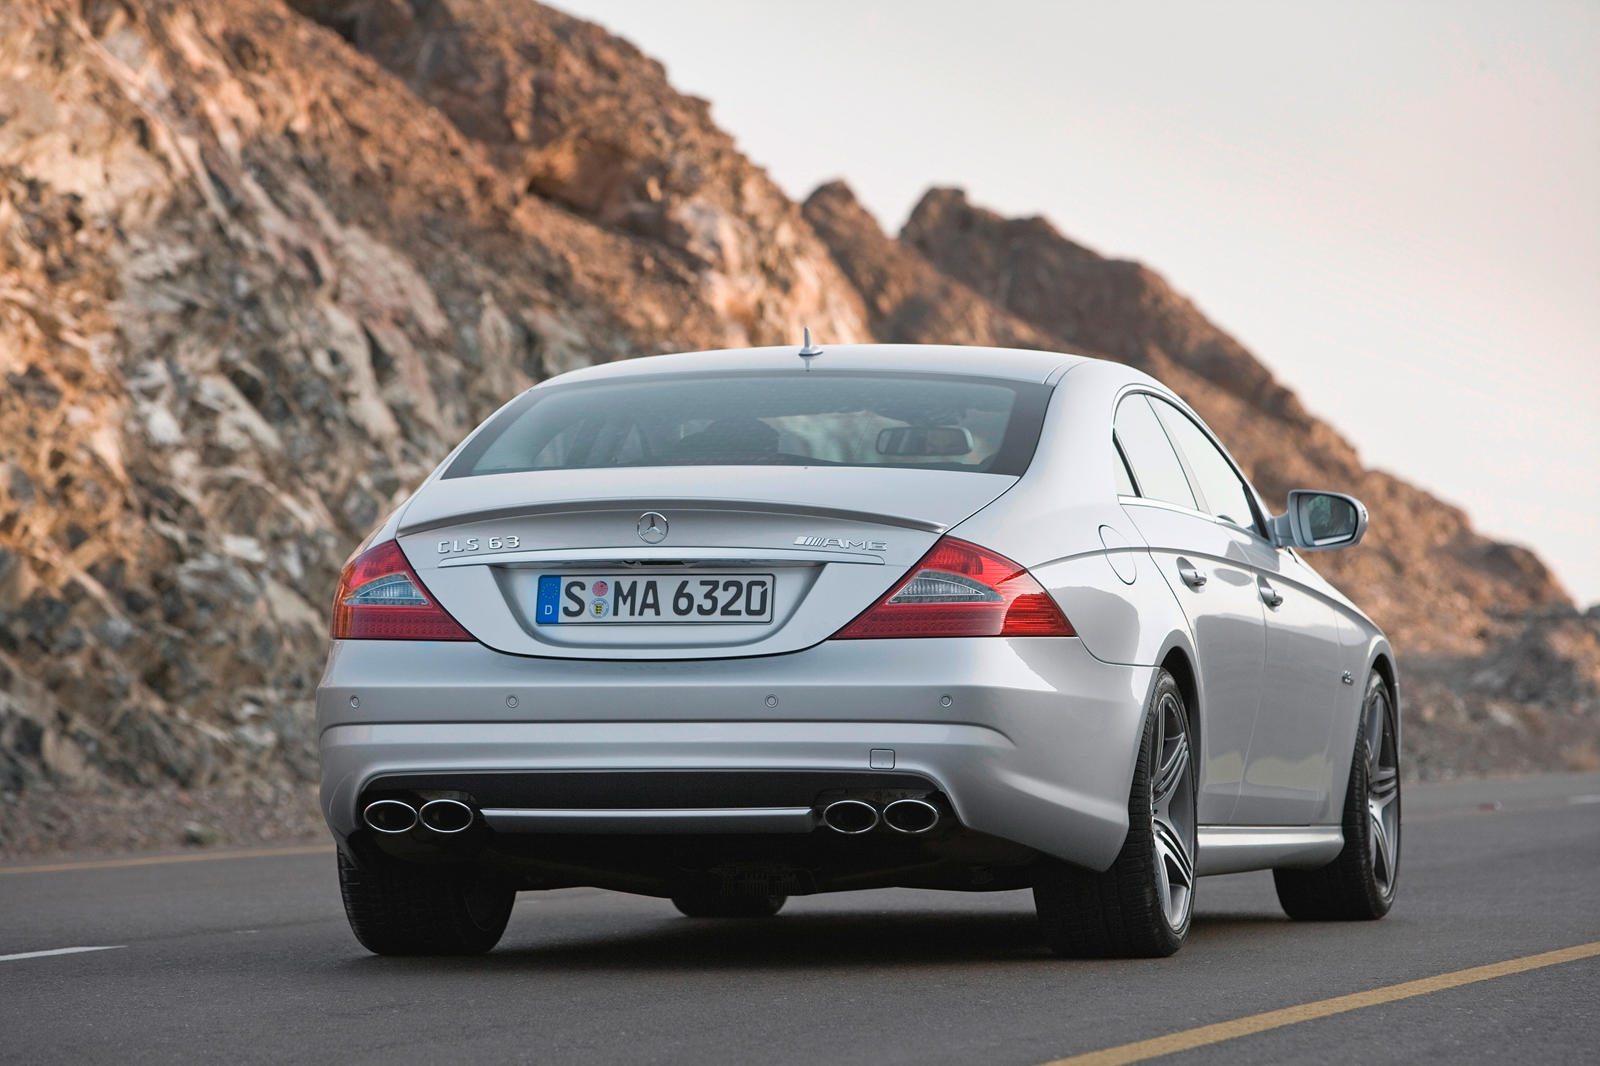 2011 Mercedes-Benz CLS-Class Rear Angle View. 